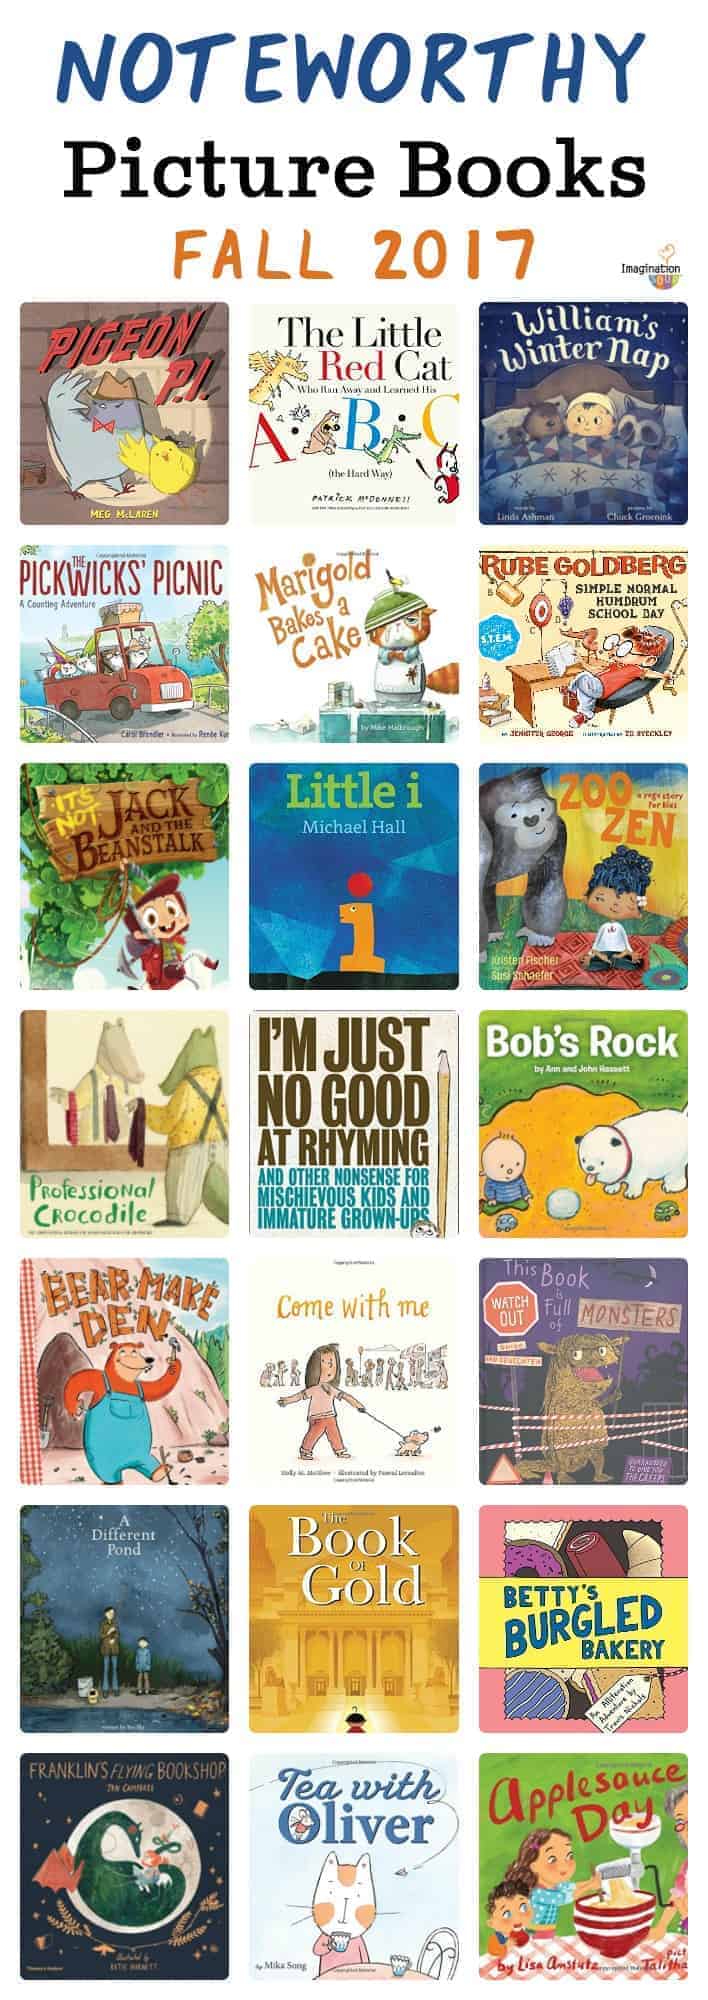 Noteworthy Fall 2017 Picture Books -- GREAT books for teachers and parents to share with children